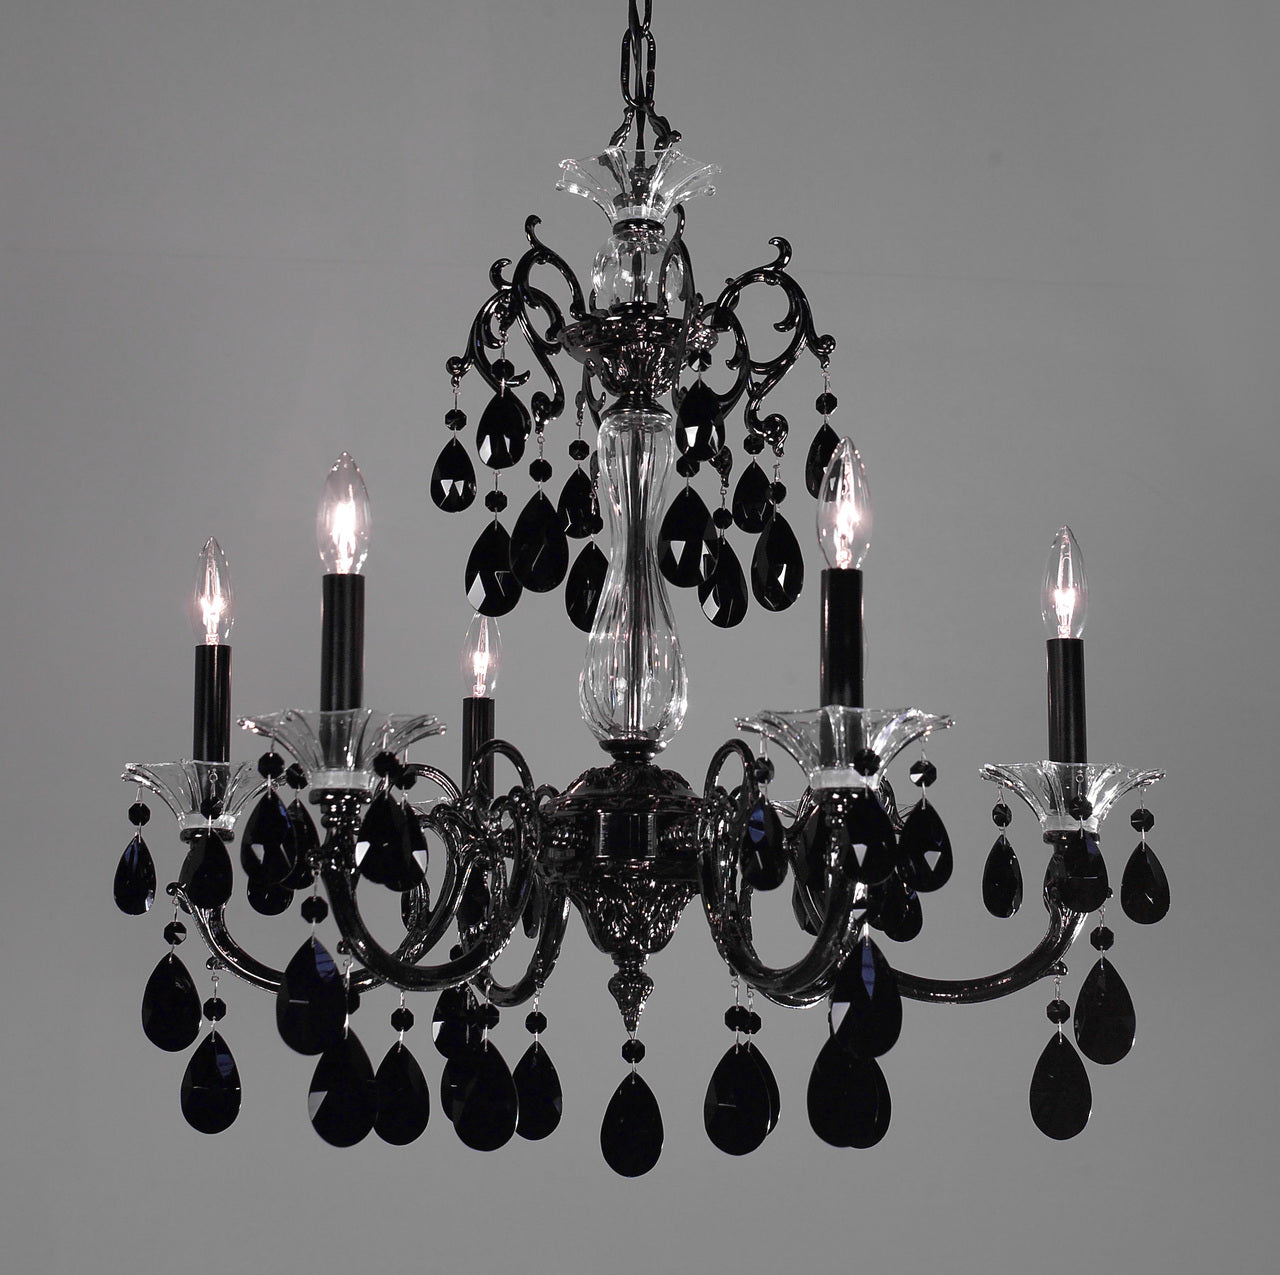 Classic Lighting 57056 EP SC Via Lombardi Crystal Chandelier in Ebony Pearl (Imported from Spain)